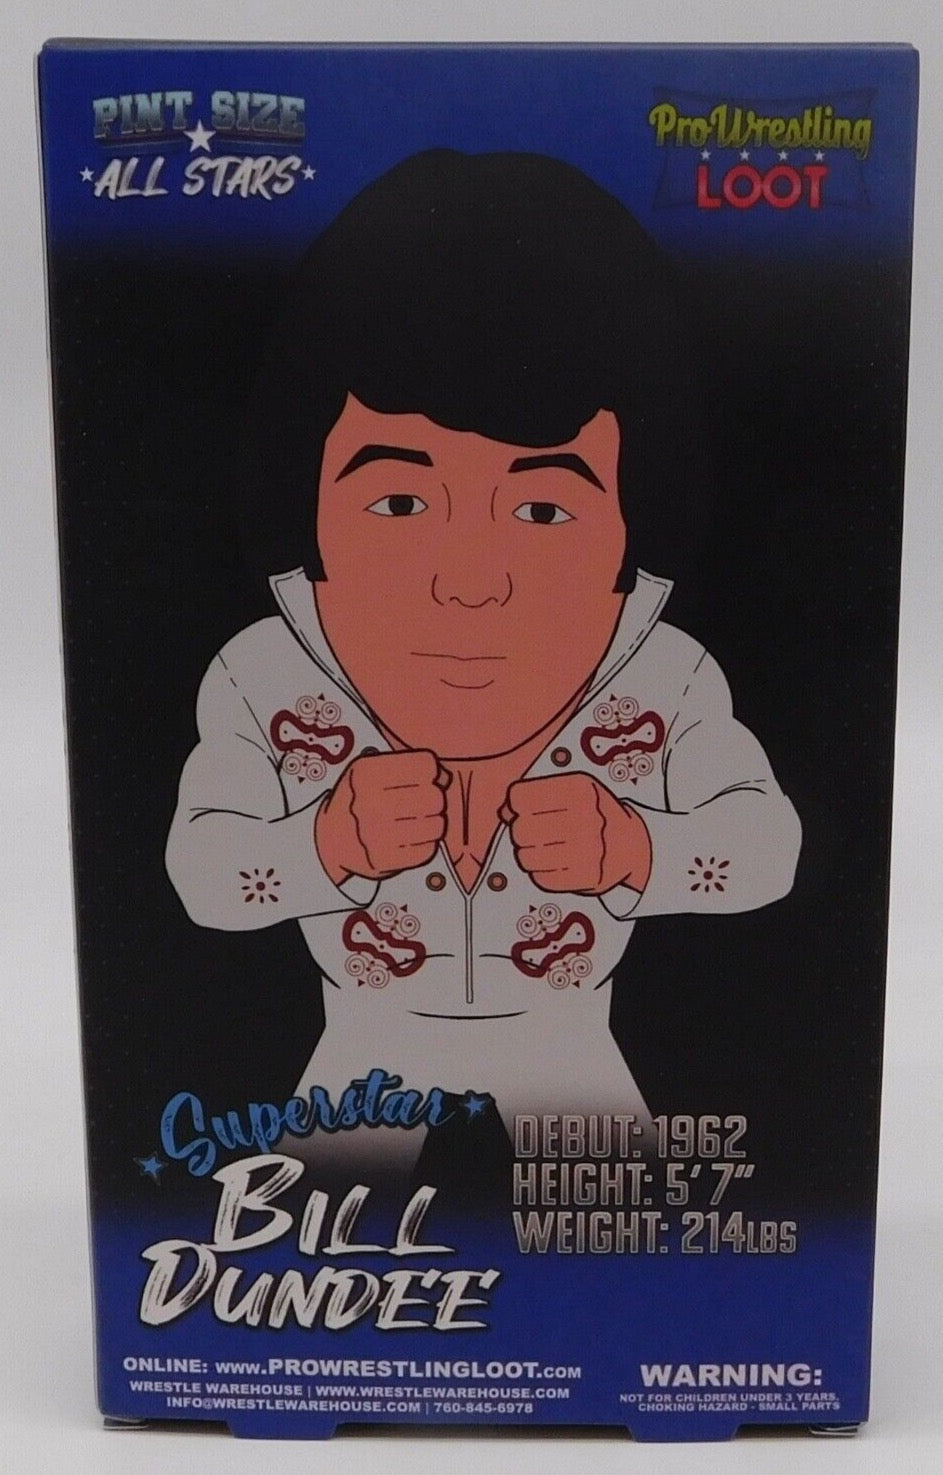 2022 Pro Wrestling Loot Pint Size All Stars Limited Edition Superstar Bill Dundee [Chase]